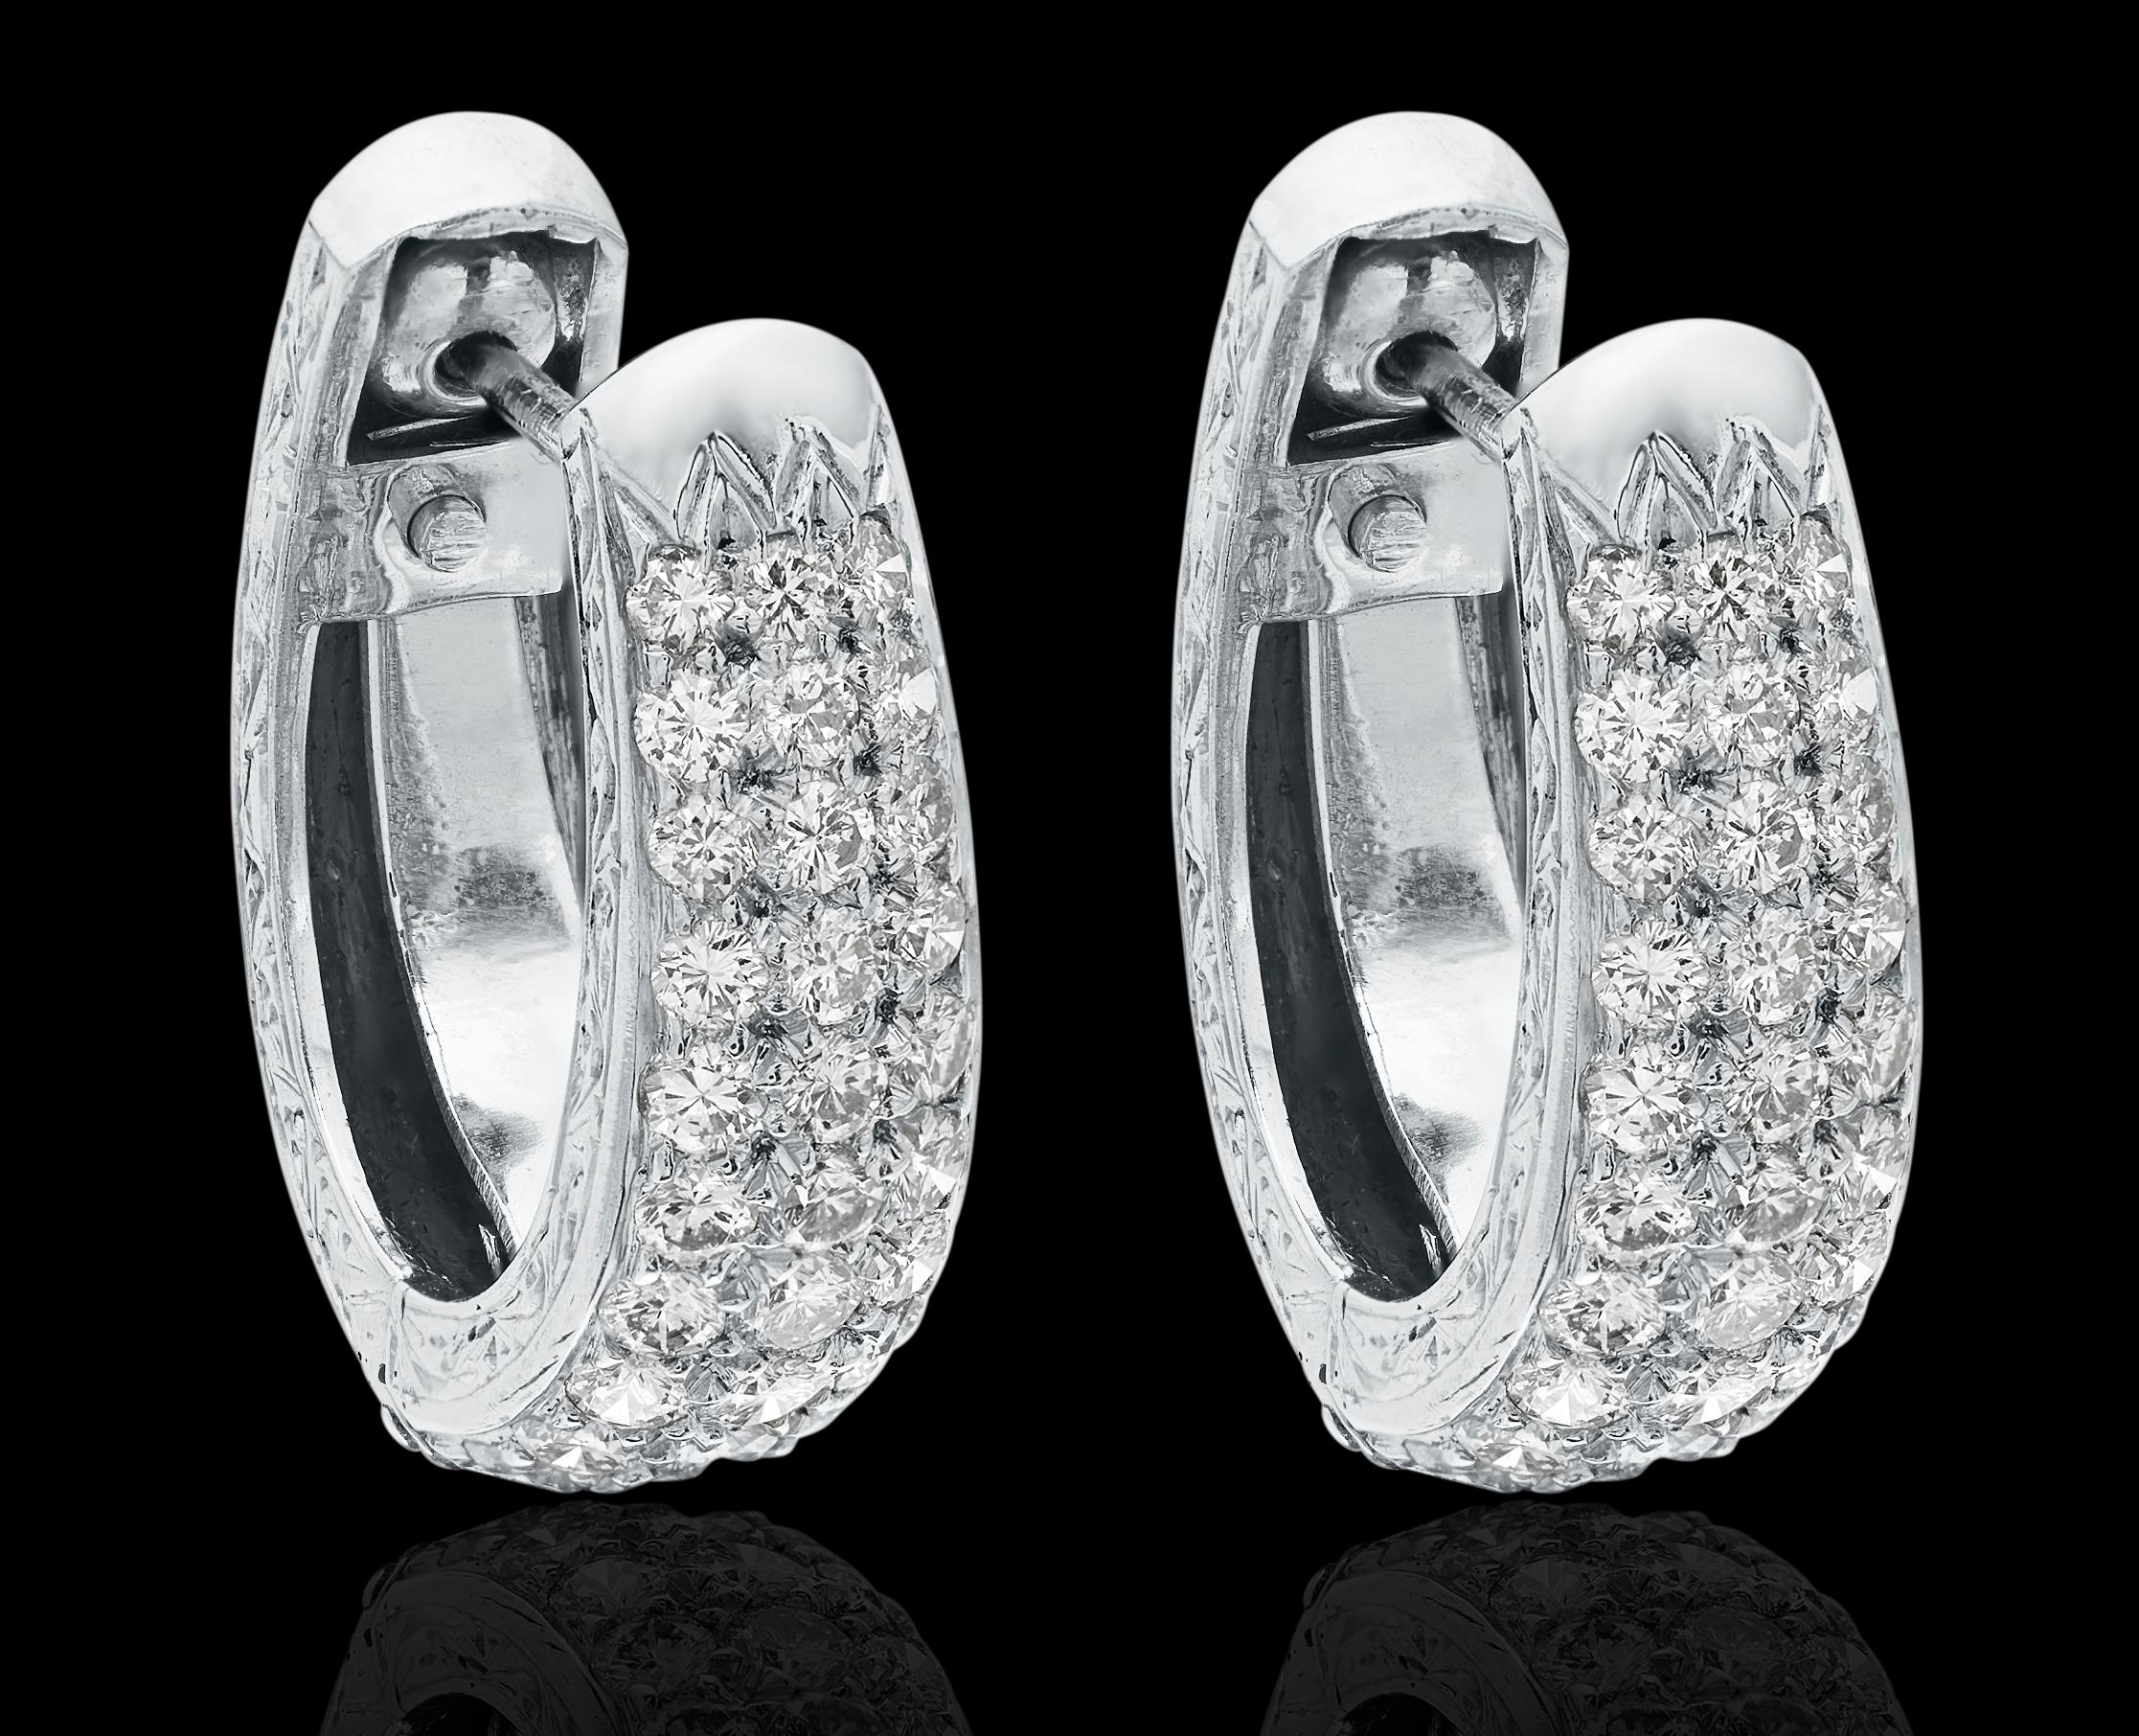 A pair of diamond hoop earrings in easy to wear fittings, subtle and noticeable. The front of the earrings are encrusted with diamonds whilst the back half is inscribed with stunning patterns of leaves and swirls.

Round brilliant cut diamonds,